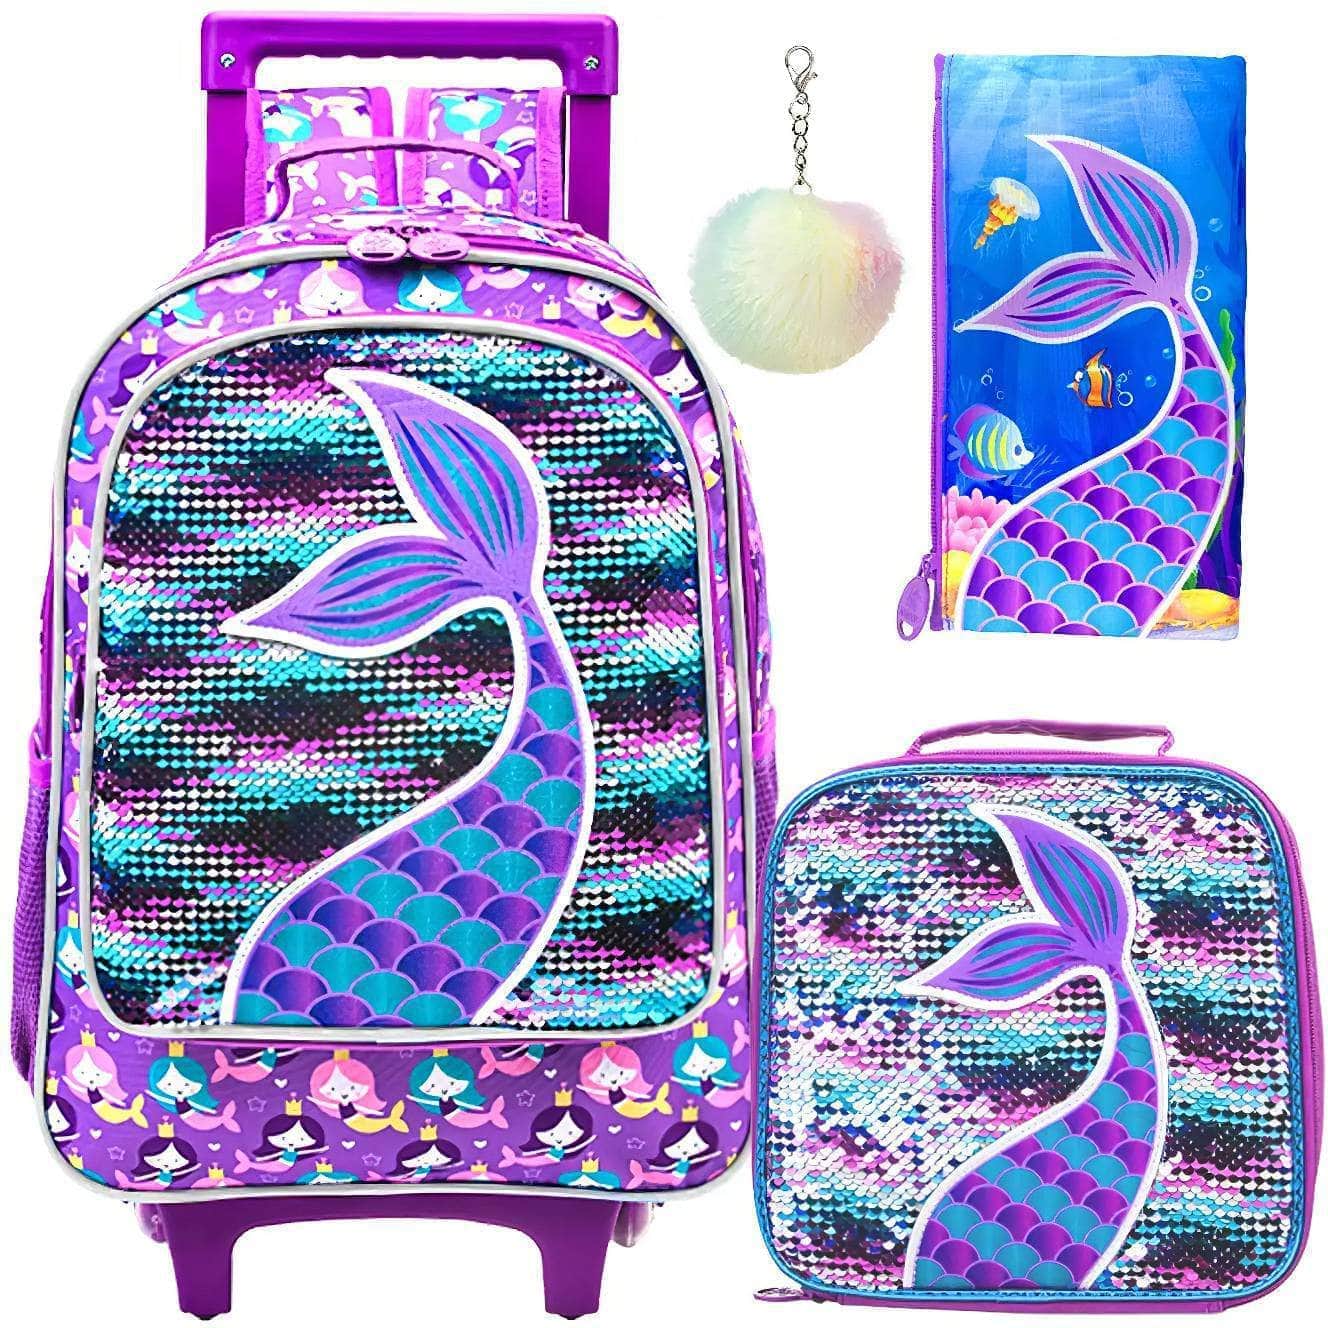 Girls' 3PCS Rolling Backpack Set - Pink Fishtail Design with Glow-in-the-dark Function, Roller Wheels, and Lunch Bag Purple